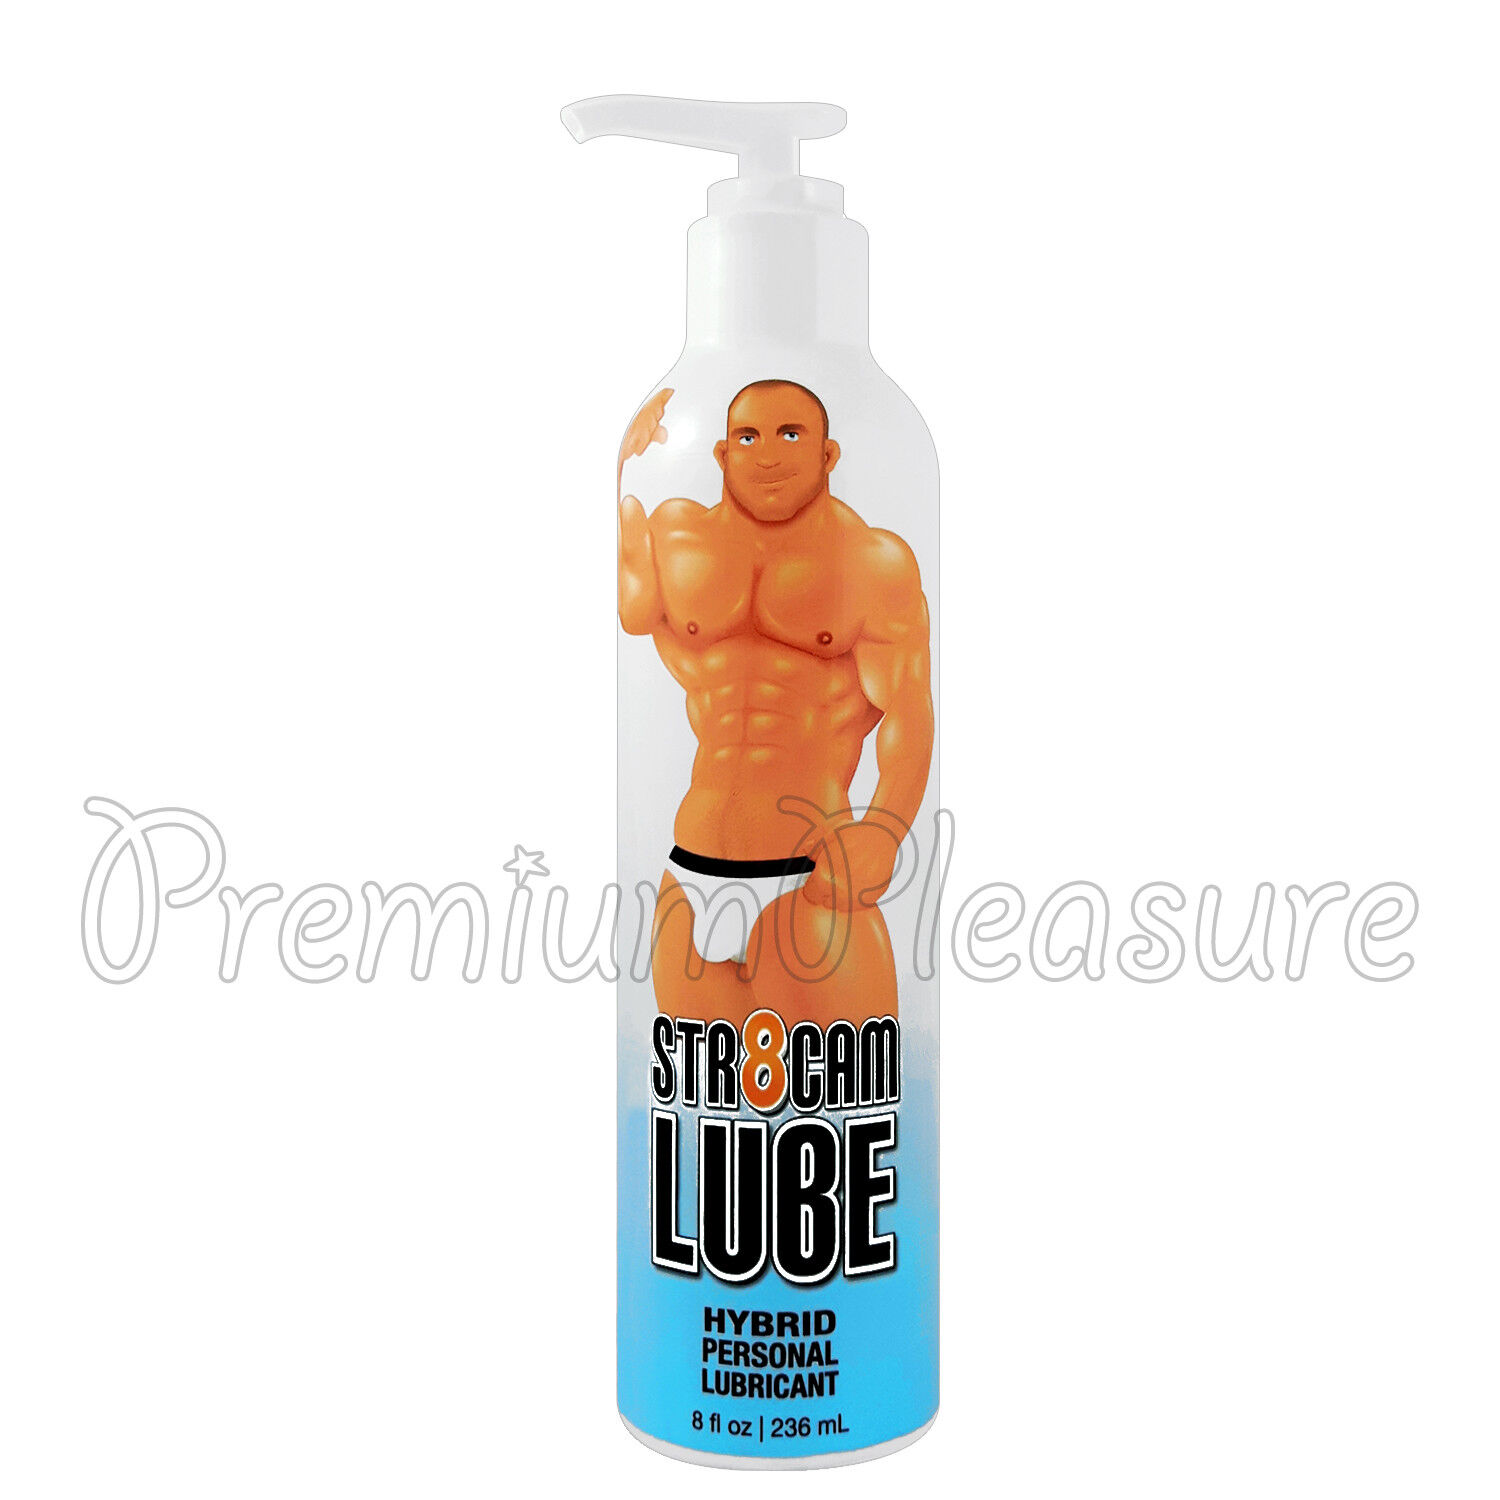 darren phelan recommends cum is the best lube pic